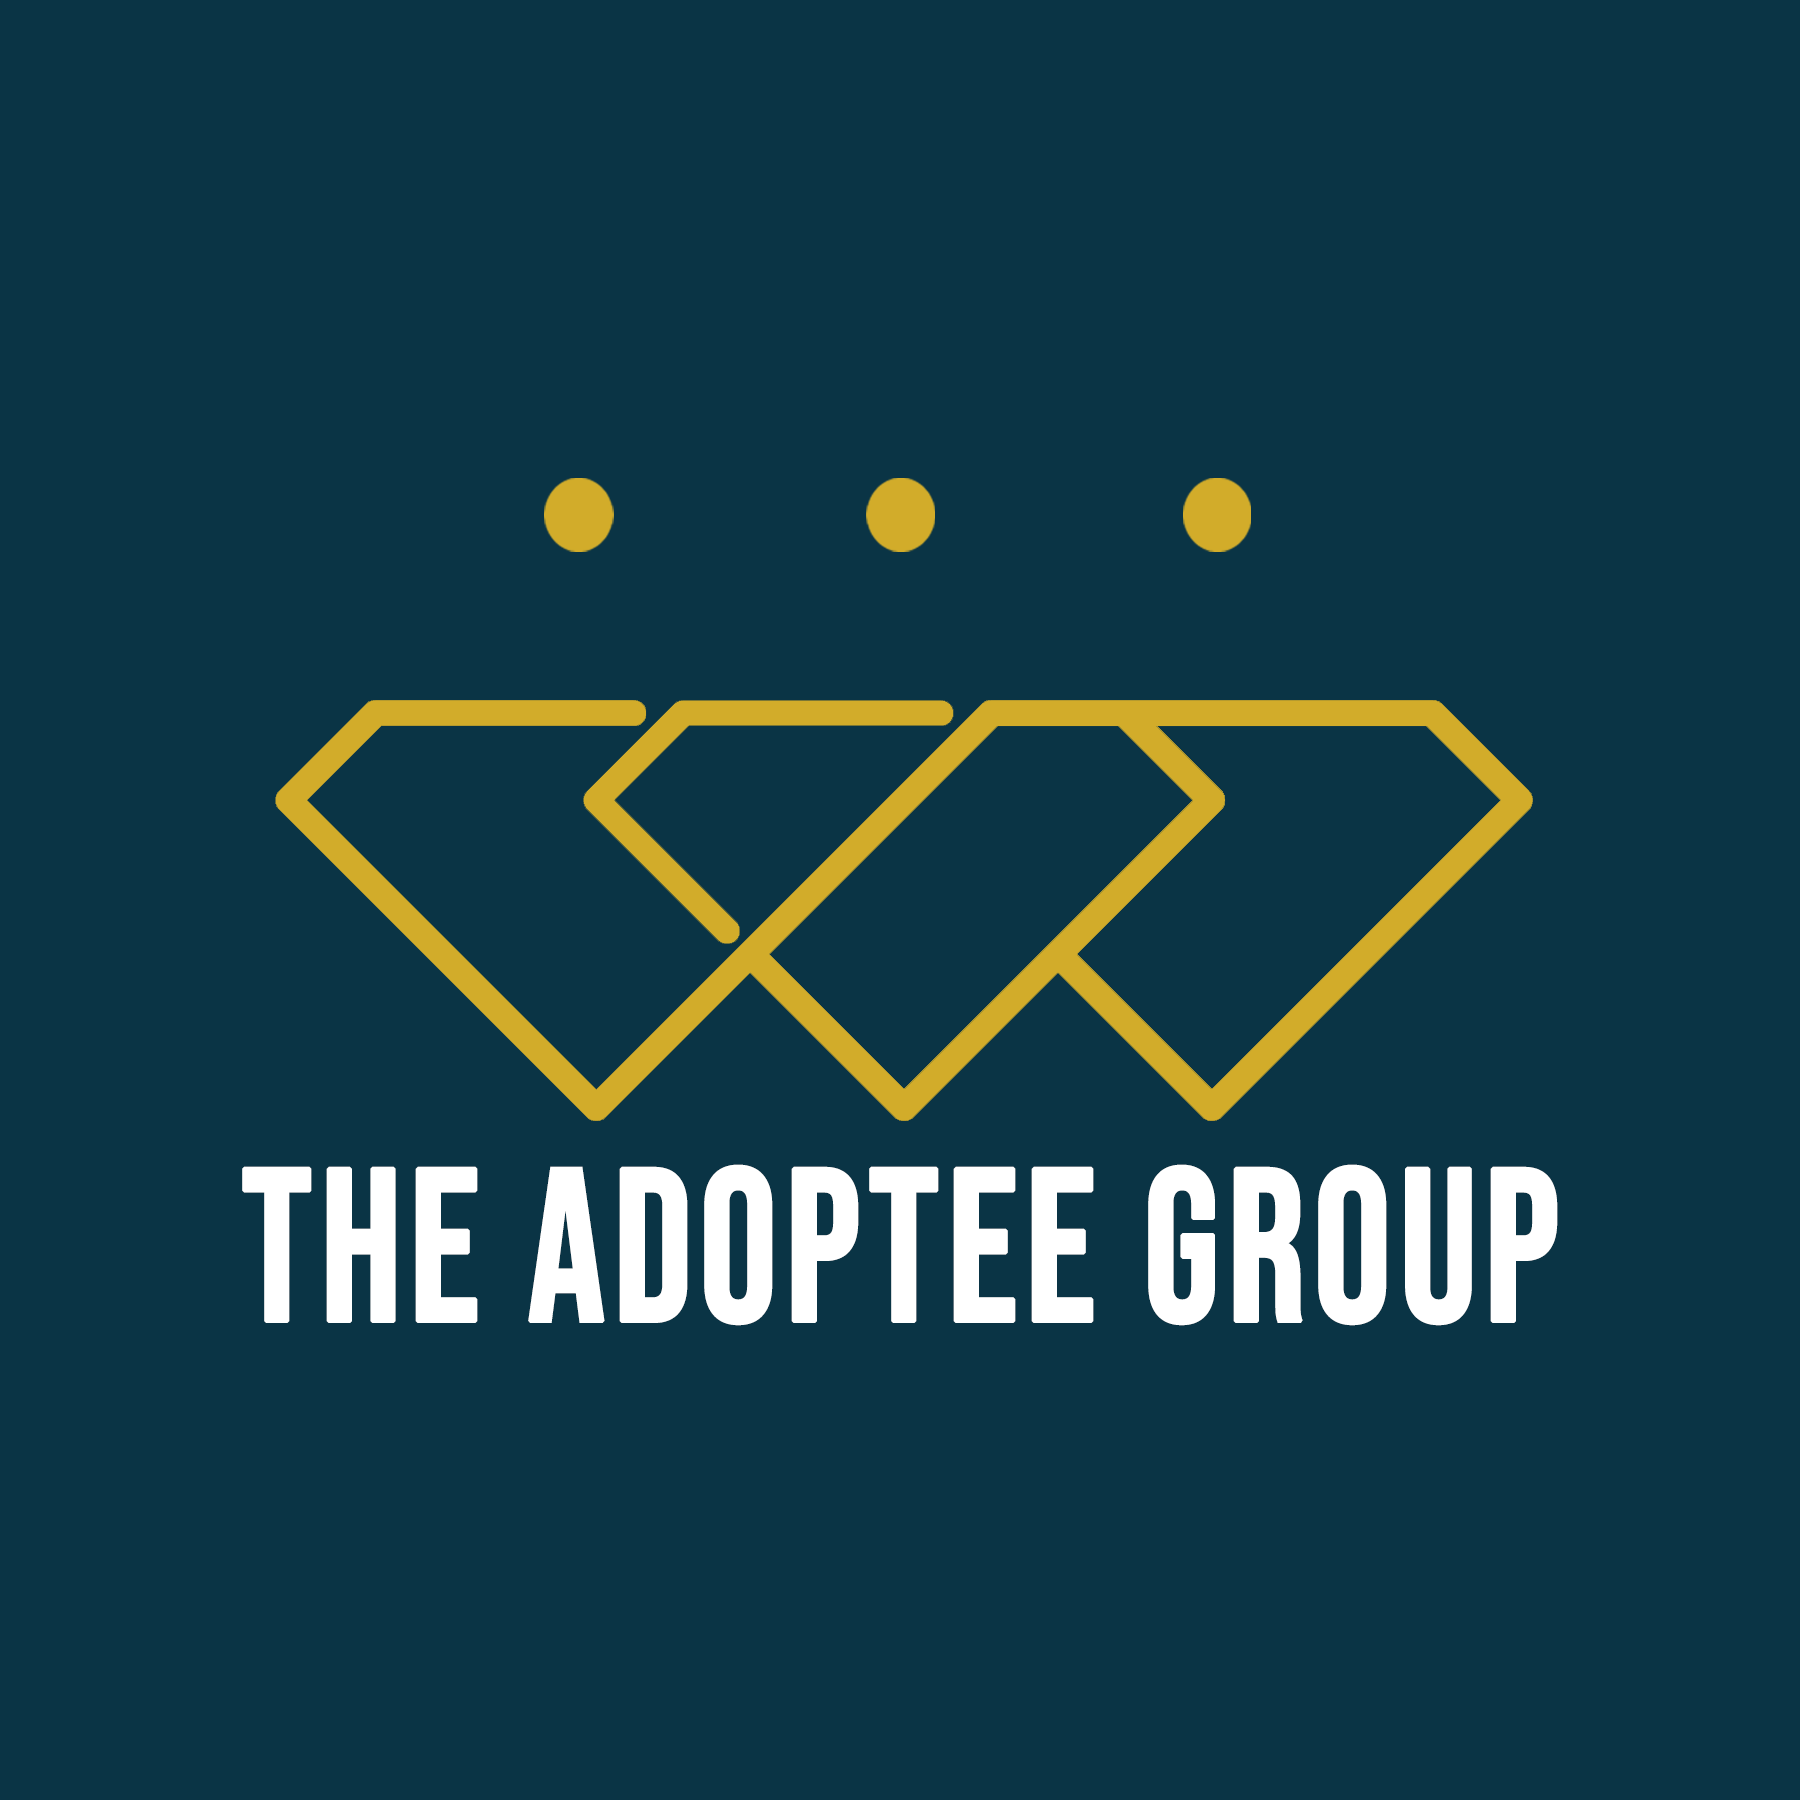 The Adoptee Group (KAD PROJECT) logo